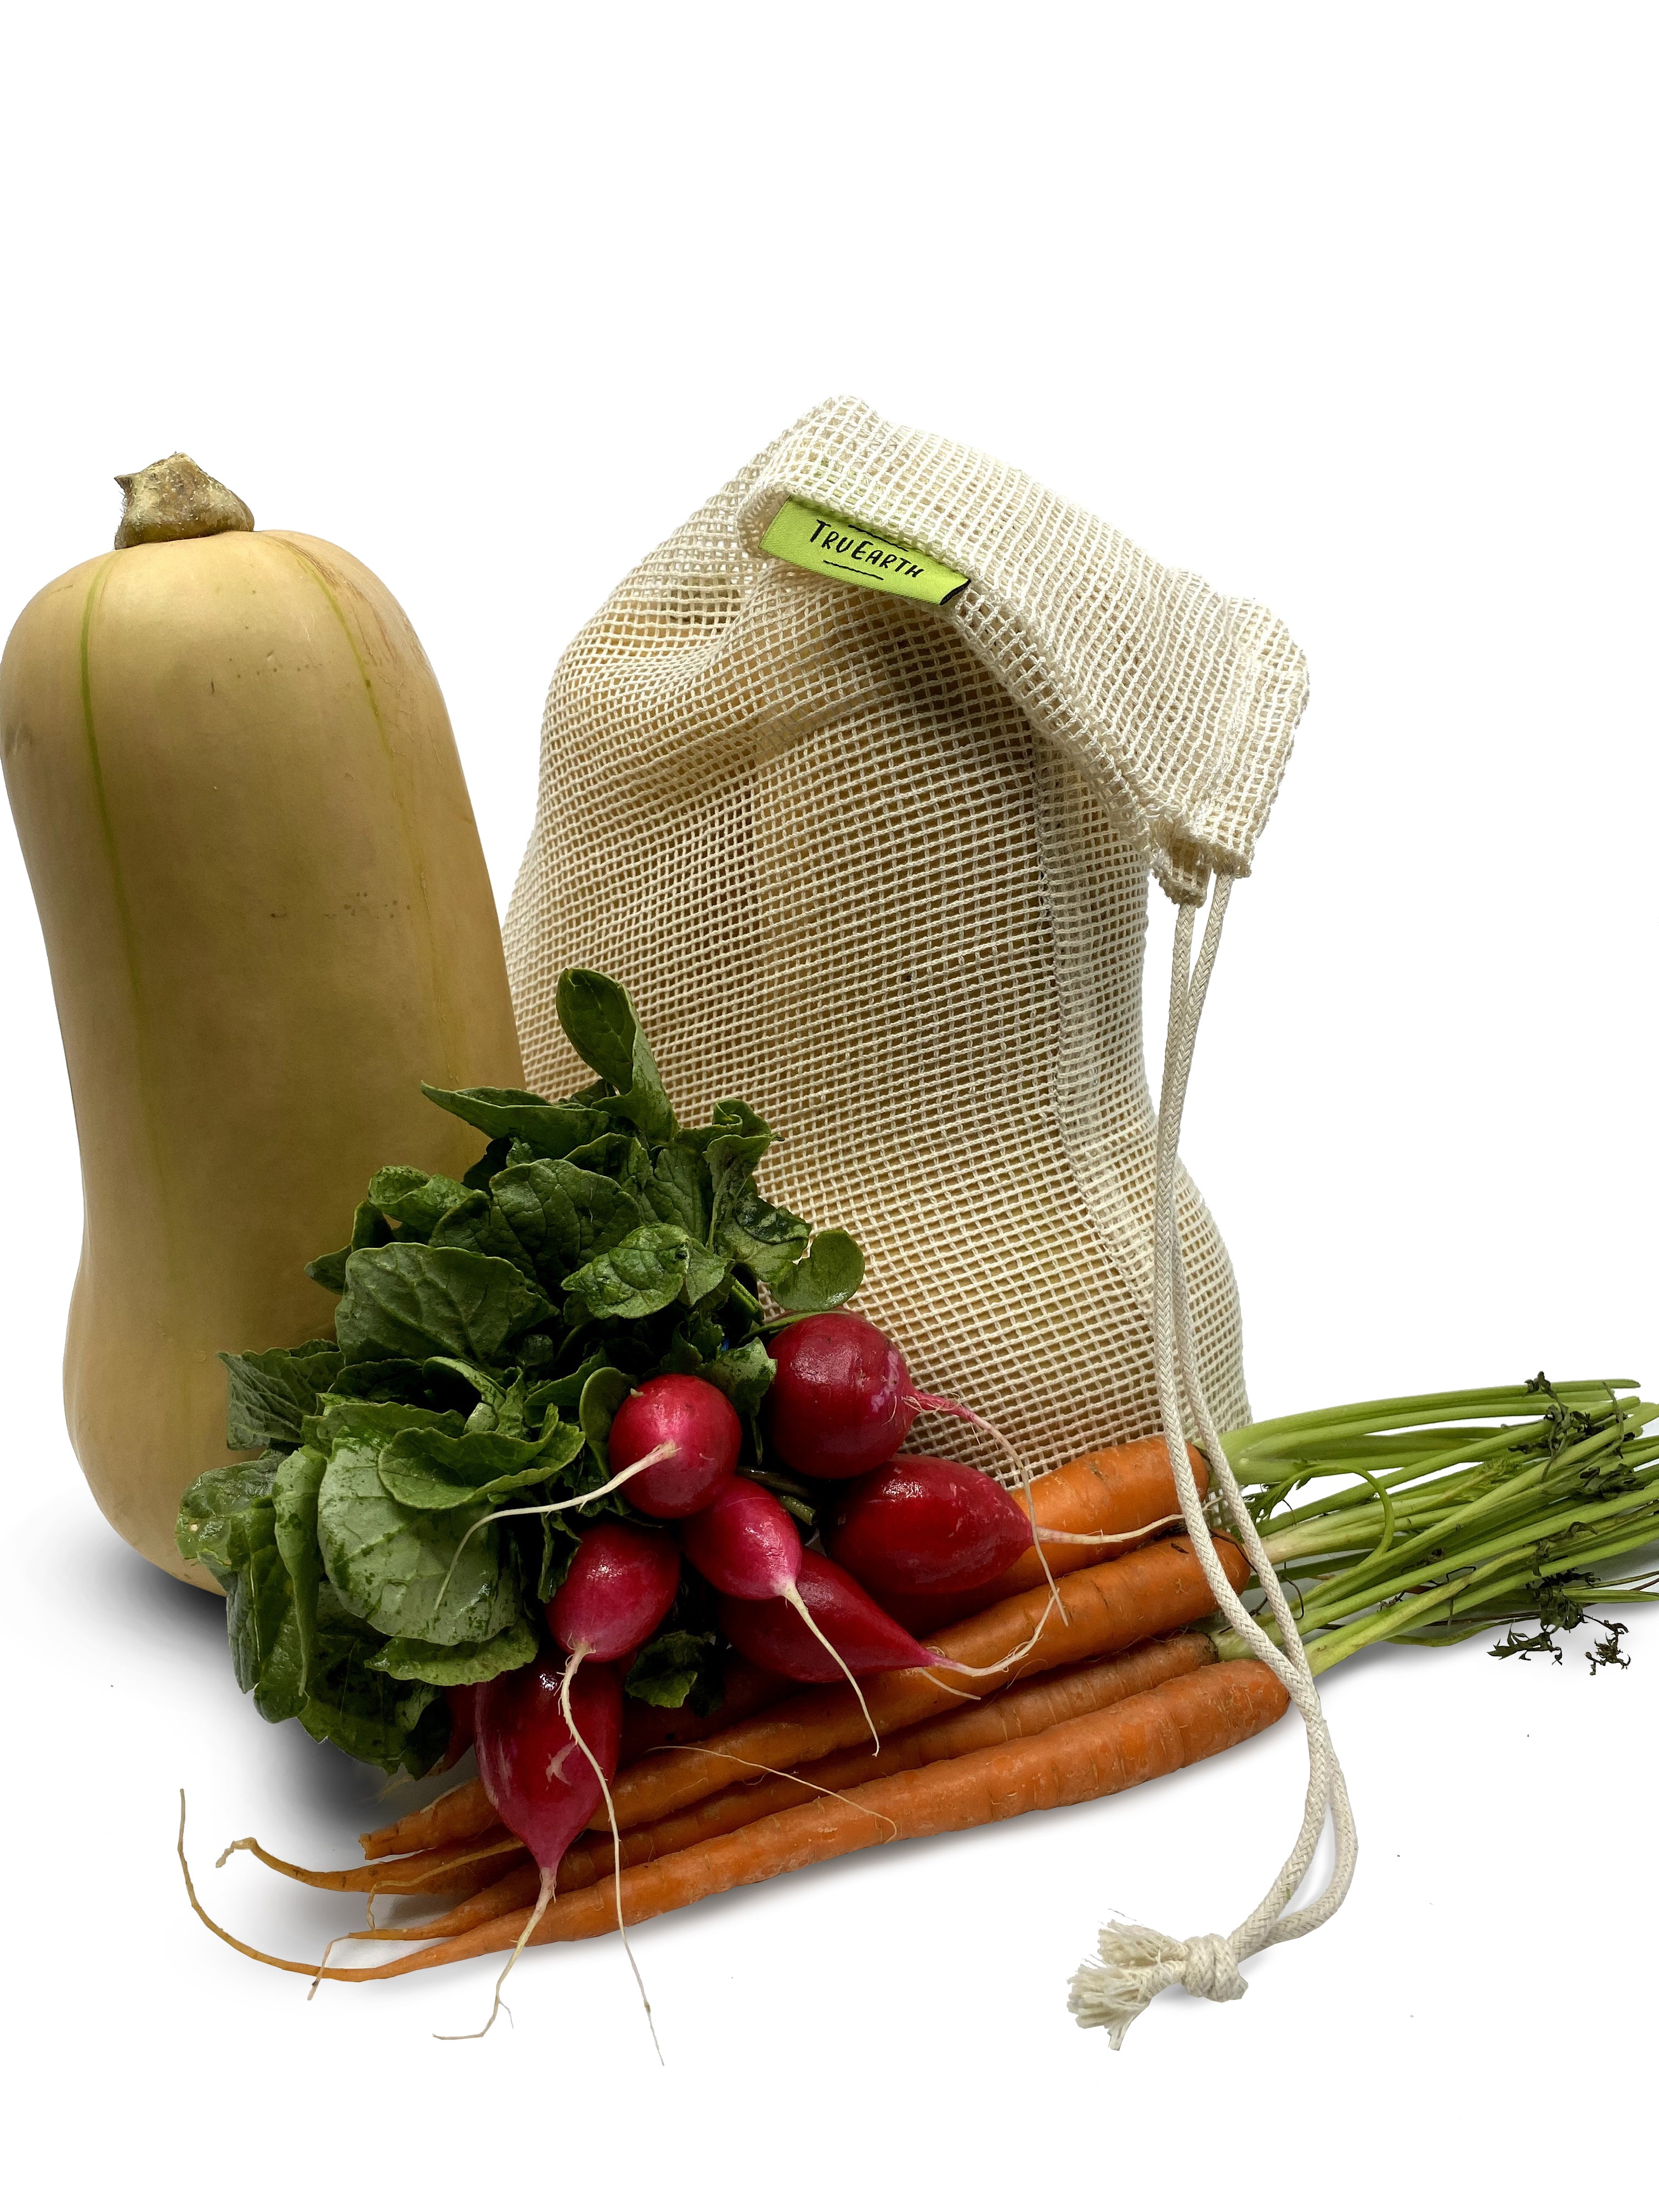 Reusable Produce Bags from Tru Earth for Sustainable Zero-Waste Grocery Shopping